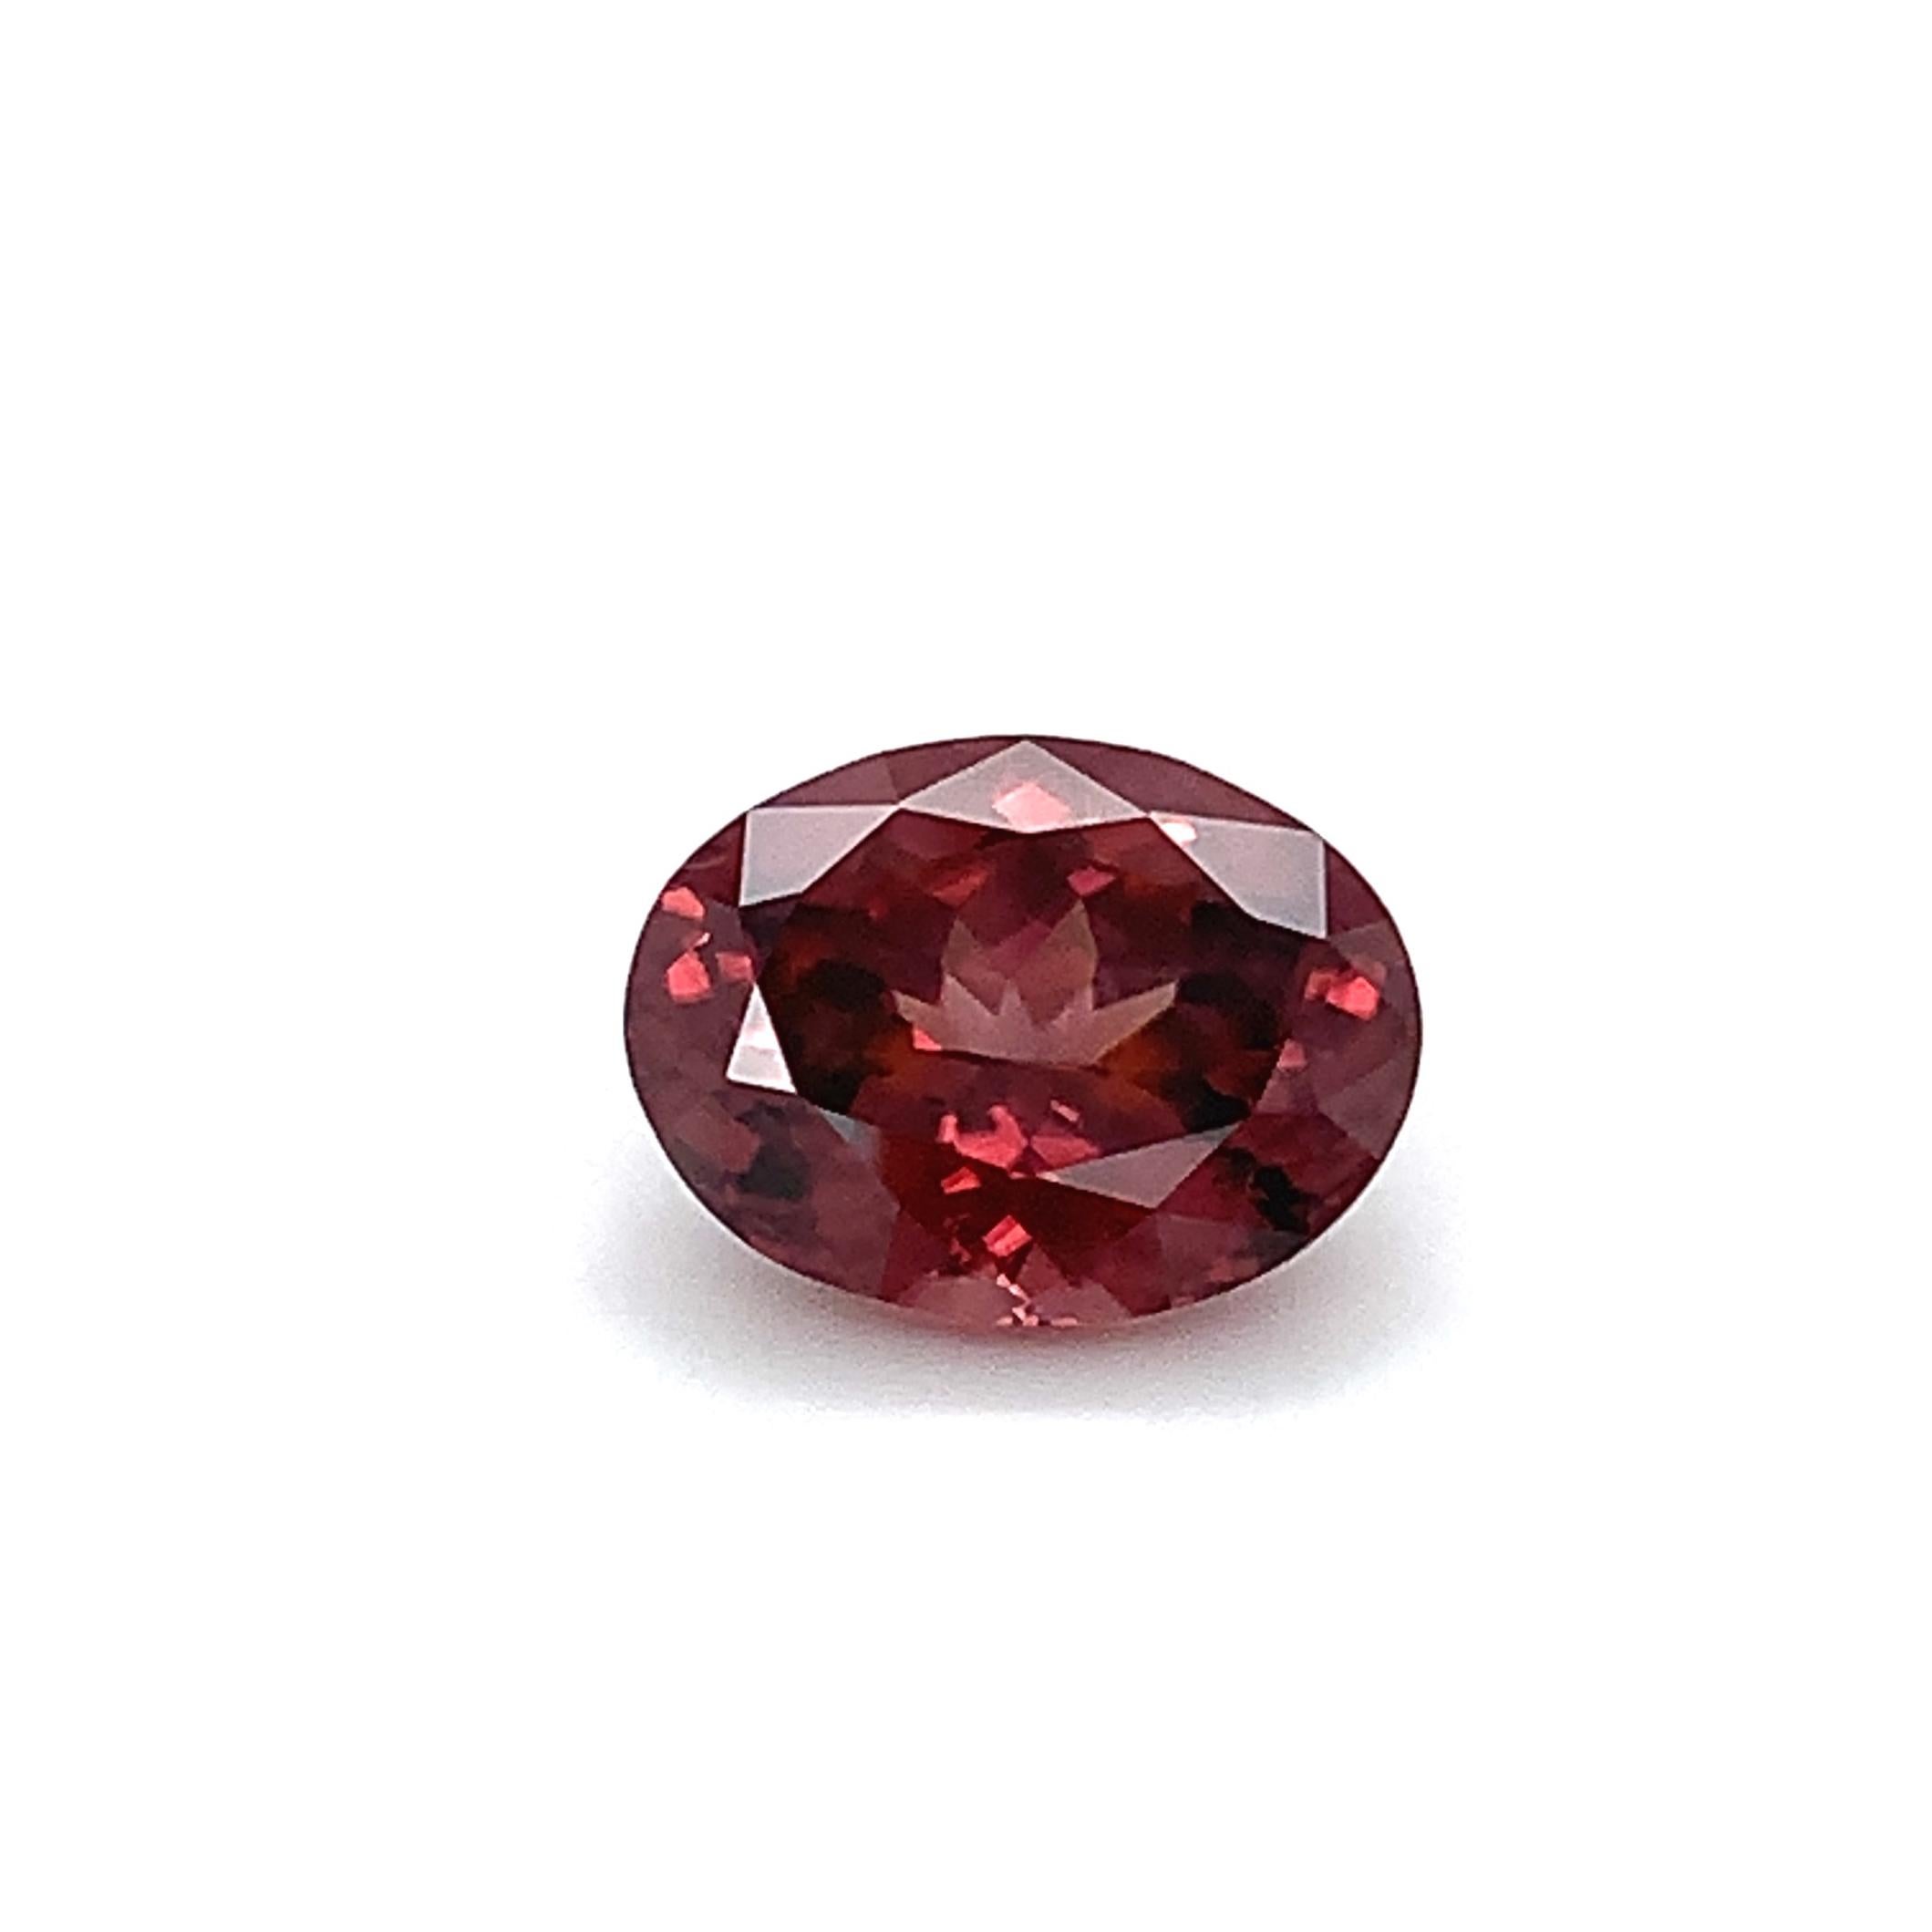 This pretty rose zircon is a perfectly symmetrical oval and has a beautiful medium reddish pink color. While zircon is widely recognized for its lovely blue shades, this December birthstone actually occurs in a rainbow of colors and has been prized